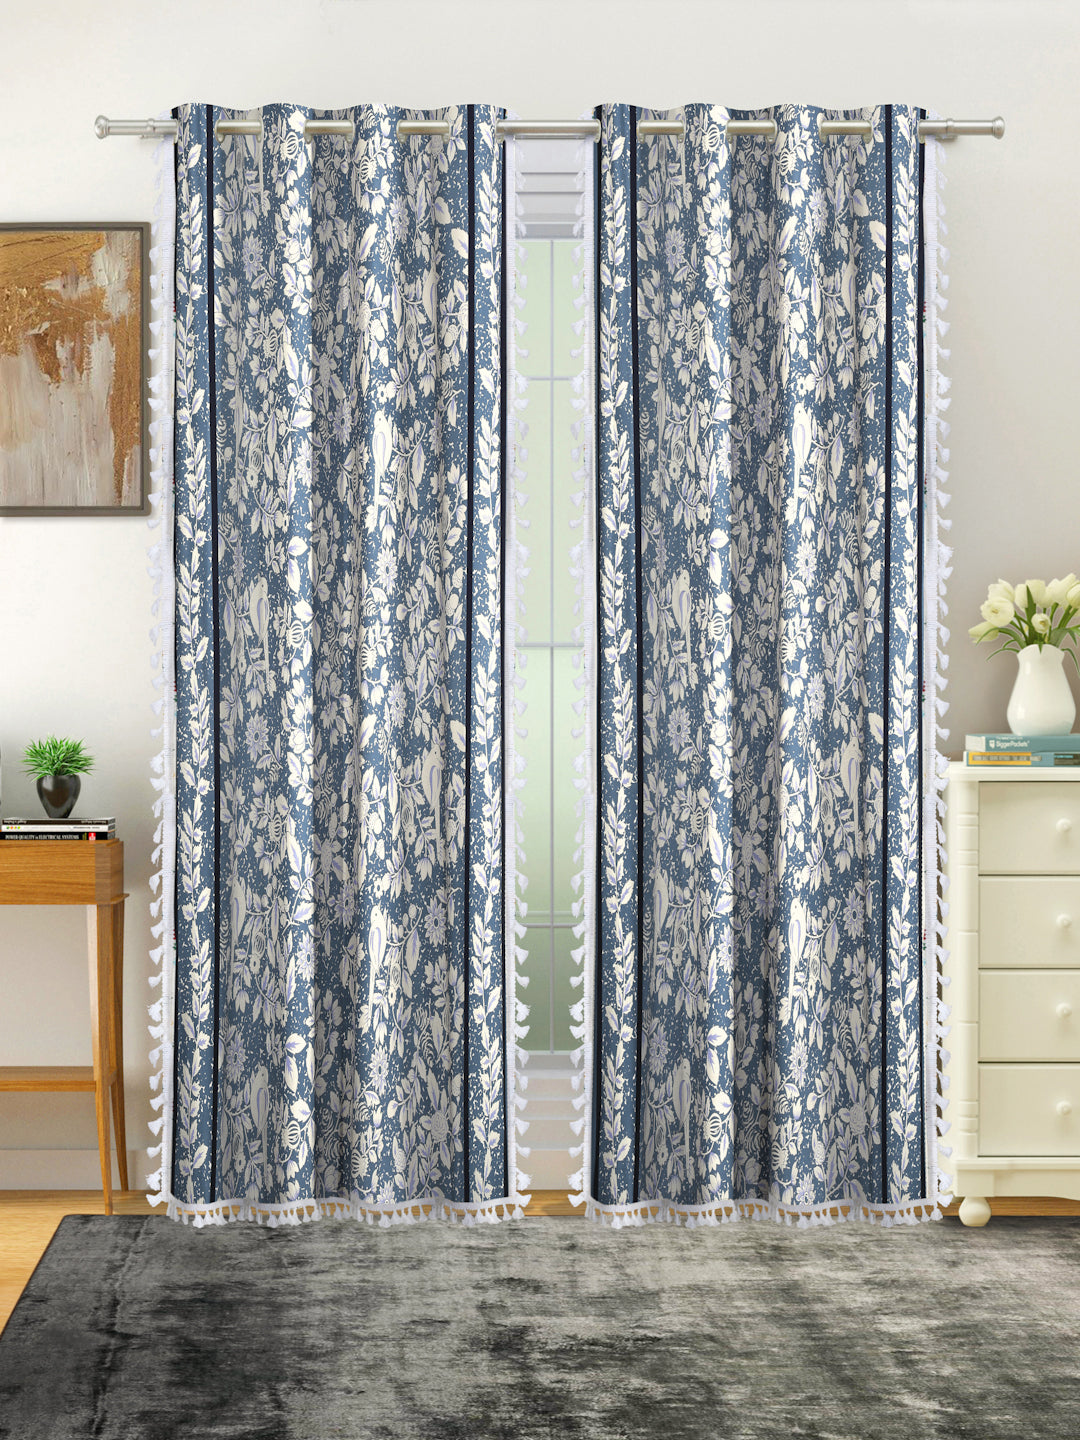 Cotton Printed Boho Light Filtering Long Door Curtain with Lace- Navy Blue (Pack of 1)